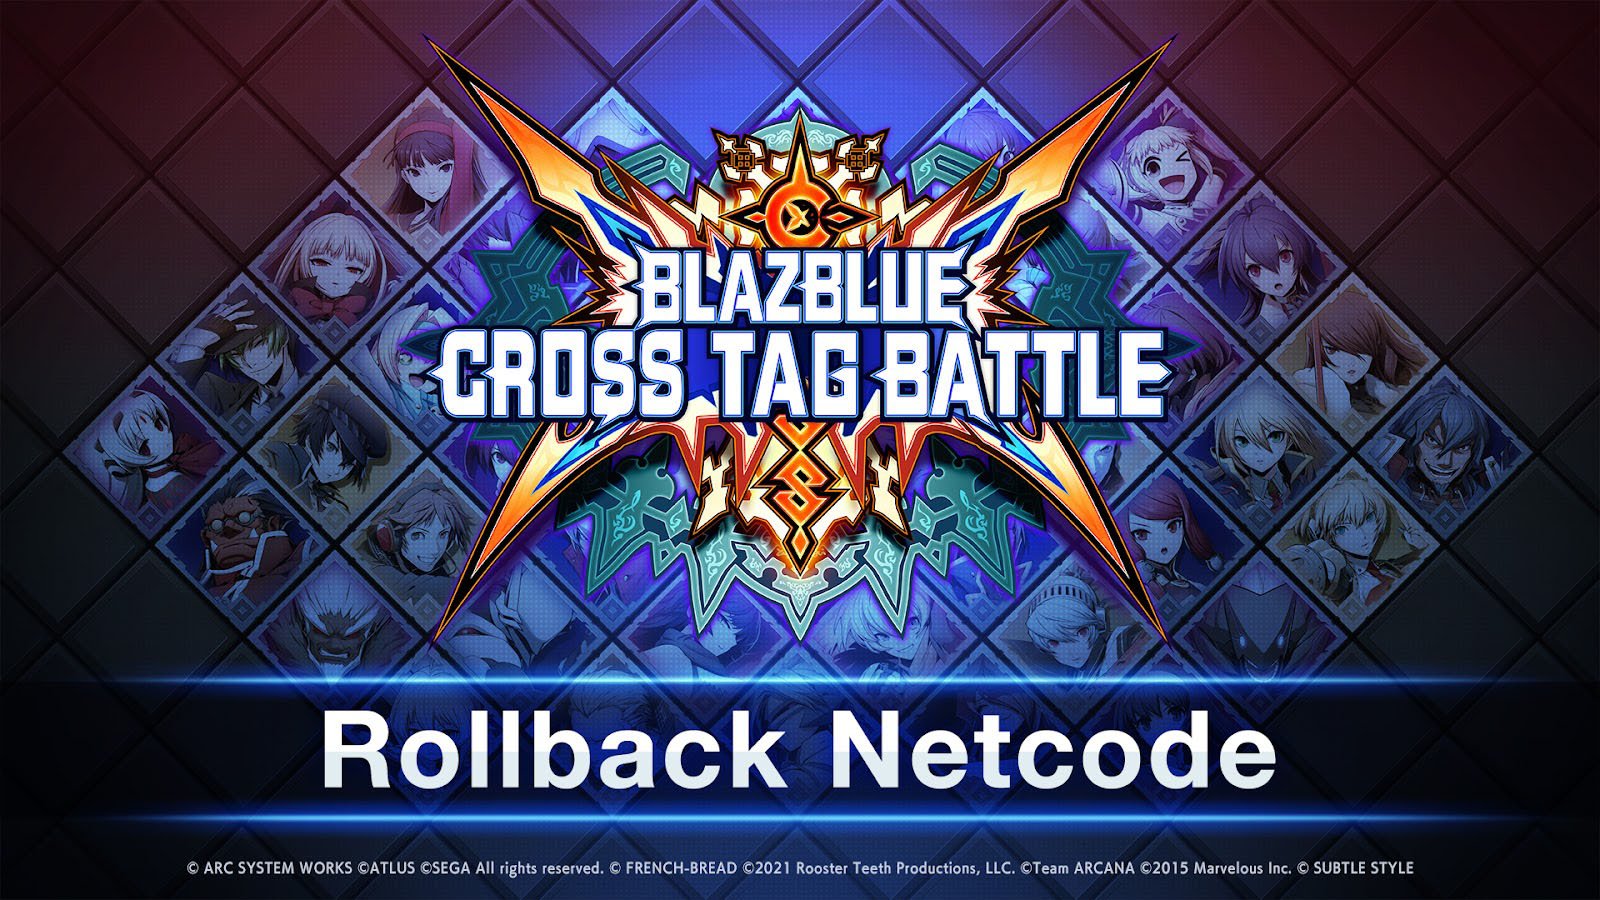 #
      BlazBlue: Cross Tag Battle for PS4, PC adds rollback netcode on April 14